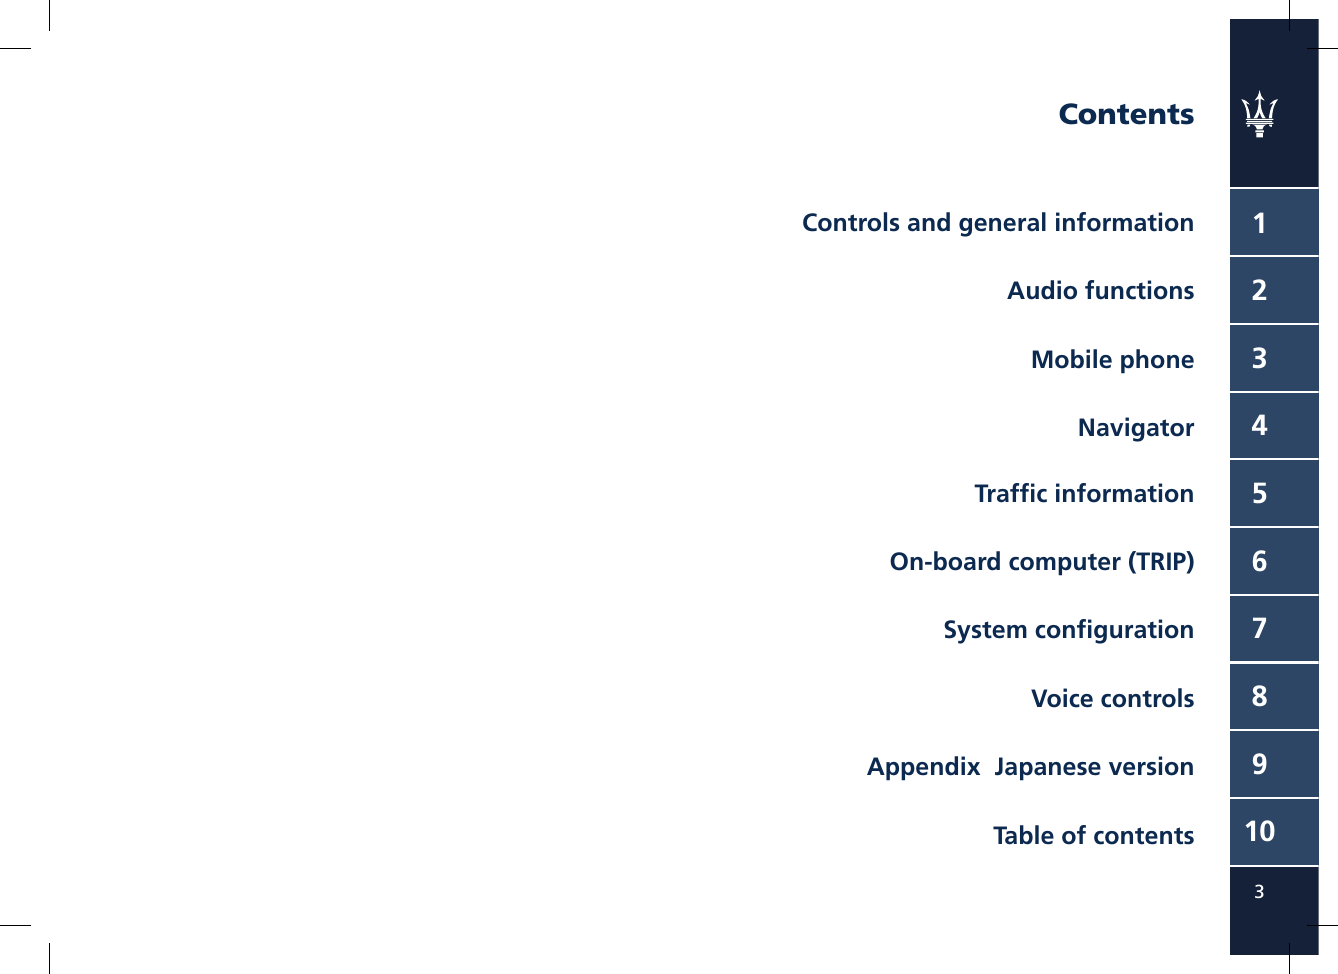 123456789103ContentsControls and general informationAudio functions Mobile phoneNavigatorTrafﬁ c informationOn-board computer (TRIP)System conﬁ guration Voice controlsAppendix  Japanese versionTable of contents